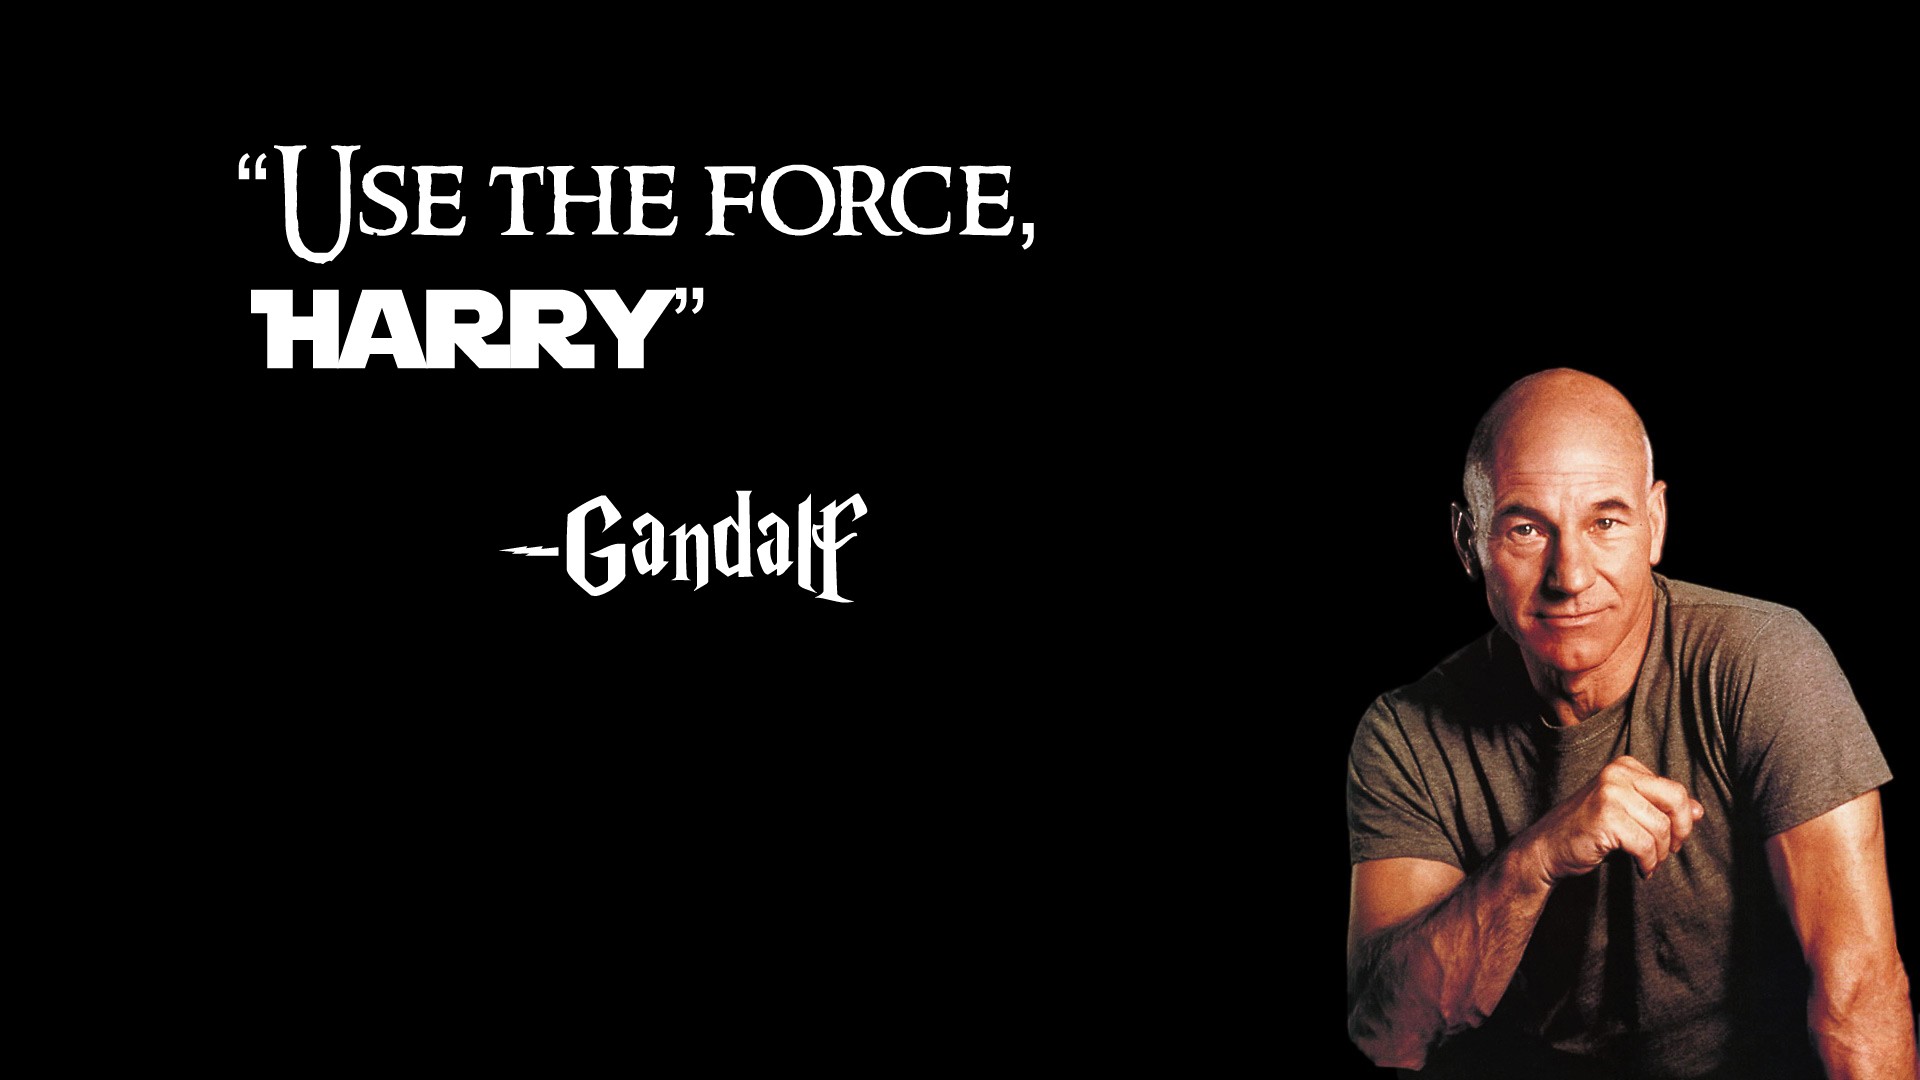 Use the force, Harry -- Gandalf